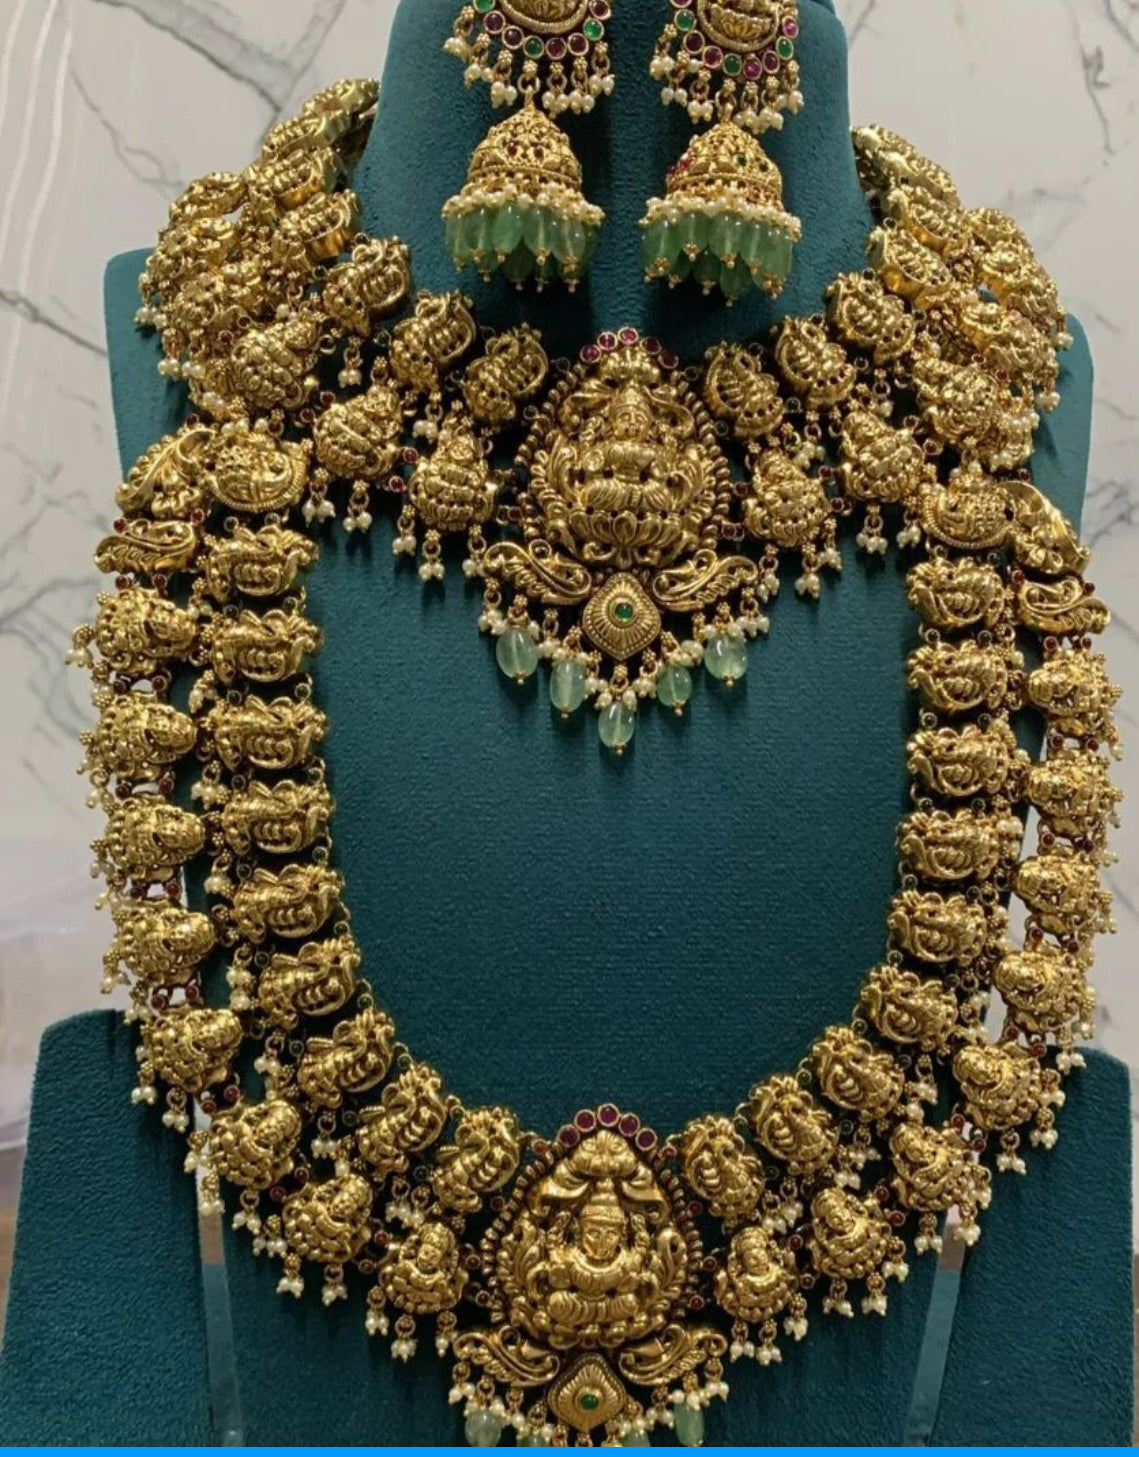 TEMPLE INDIAN JEWELRY